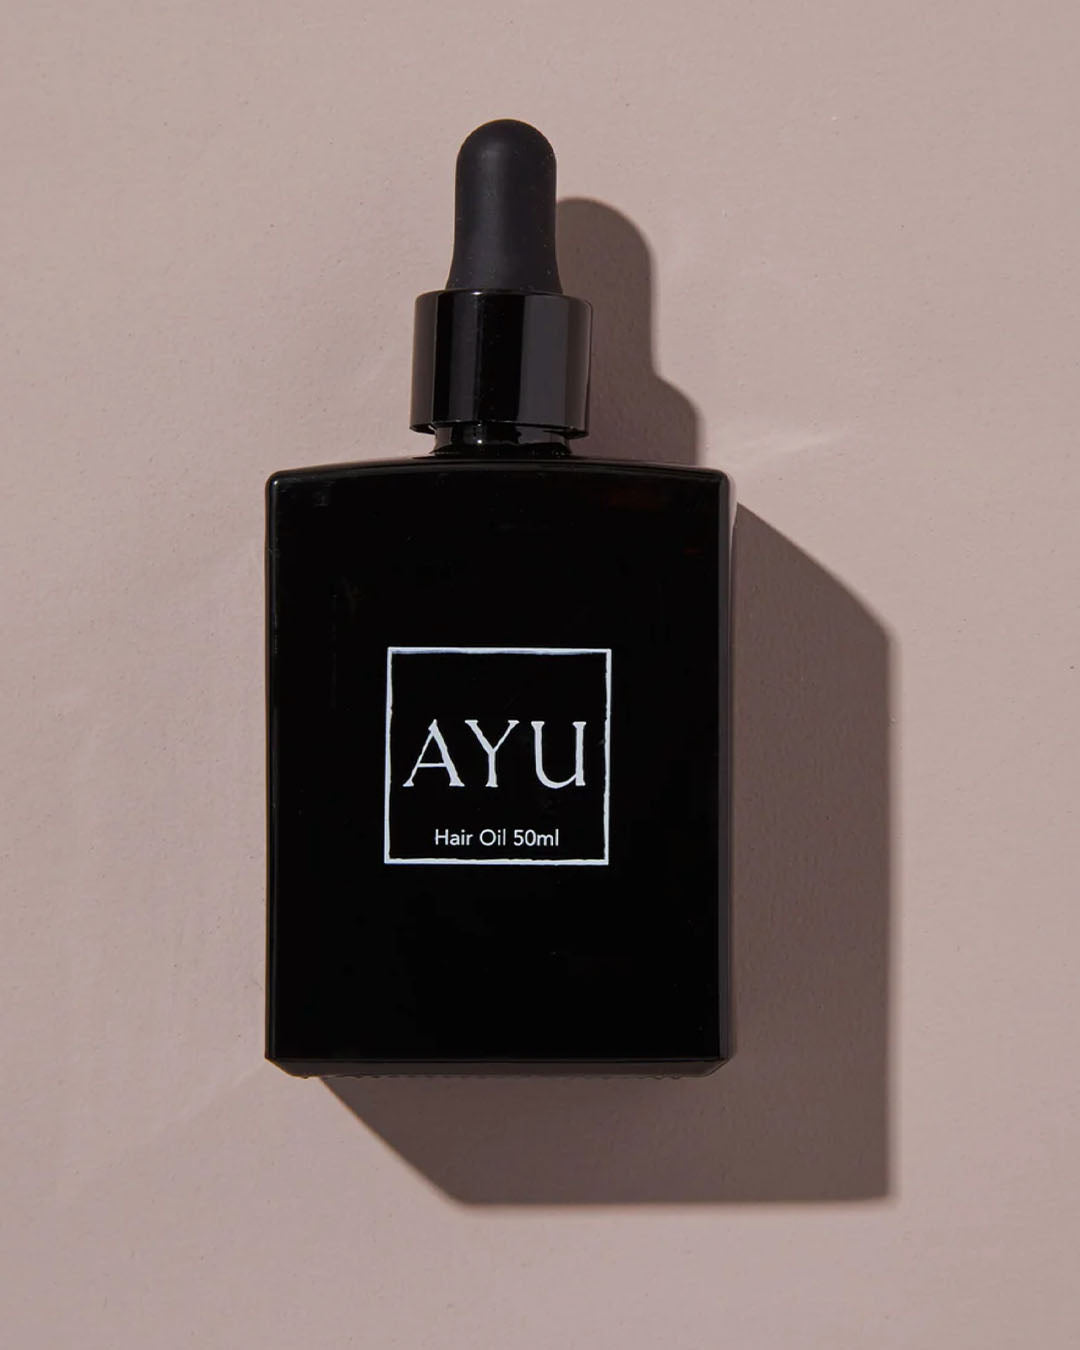 Ceremony Hair Oil Hair Care by Ayu - Prae Store